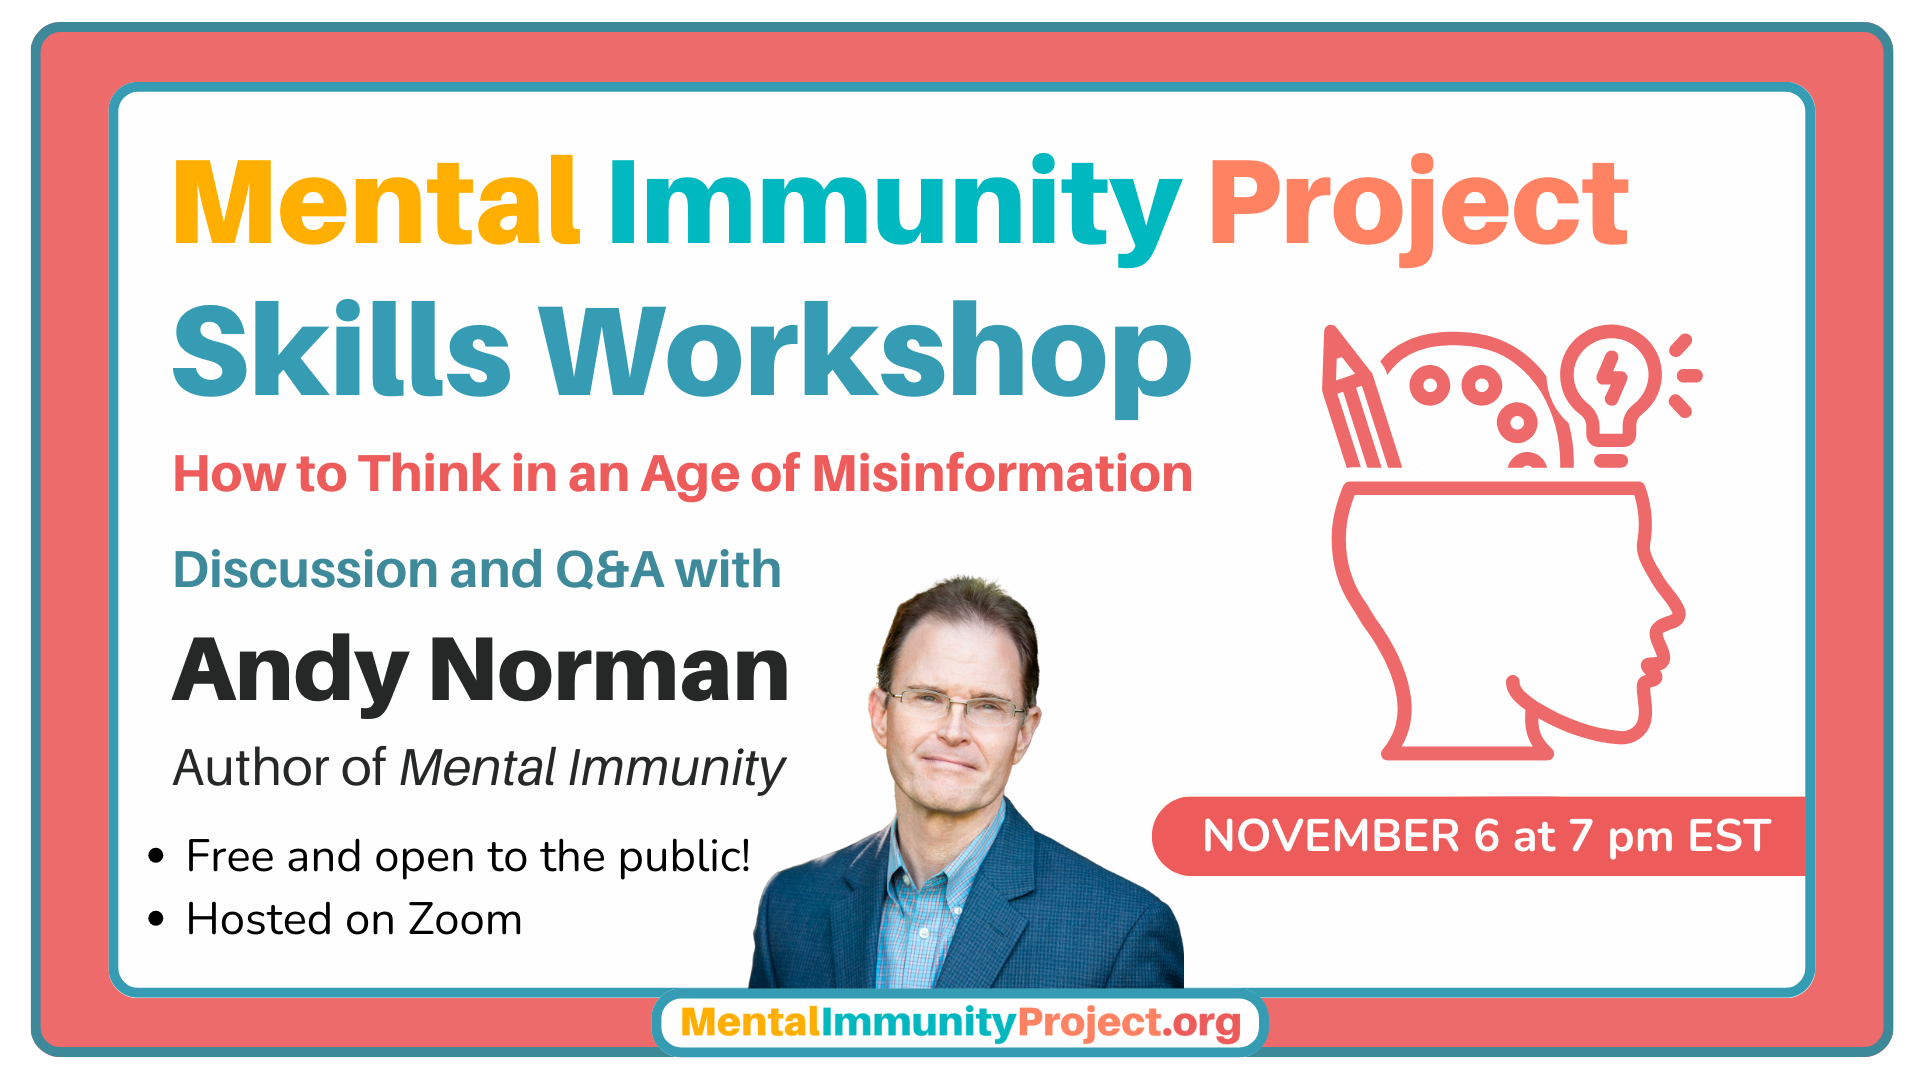 Mental Immunity Project Skills Workshop
How to Think in an Age of Misinformation
Discussion and Q&A with 
Andy Norman
Author of Mental Immunity
Free and open to the public
Hosted on Zoom
November 6 at 7 pm EST
Register via the link in our profile
Free, open to the public, hosted on Zoom